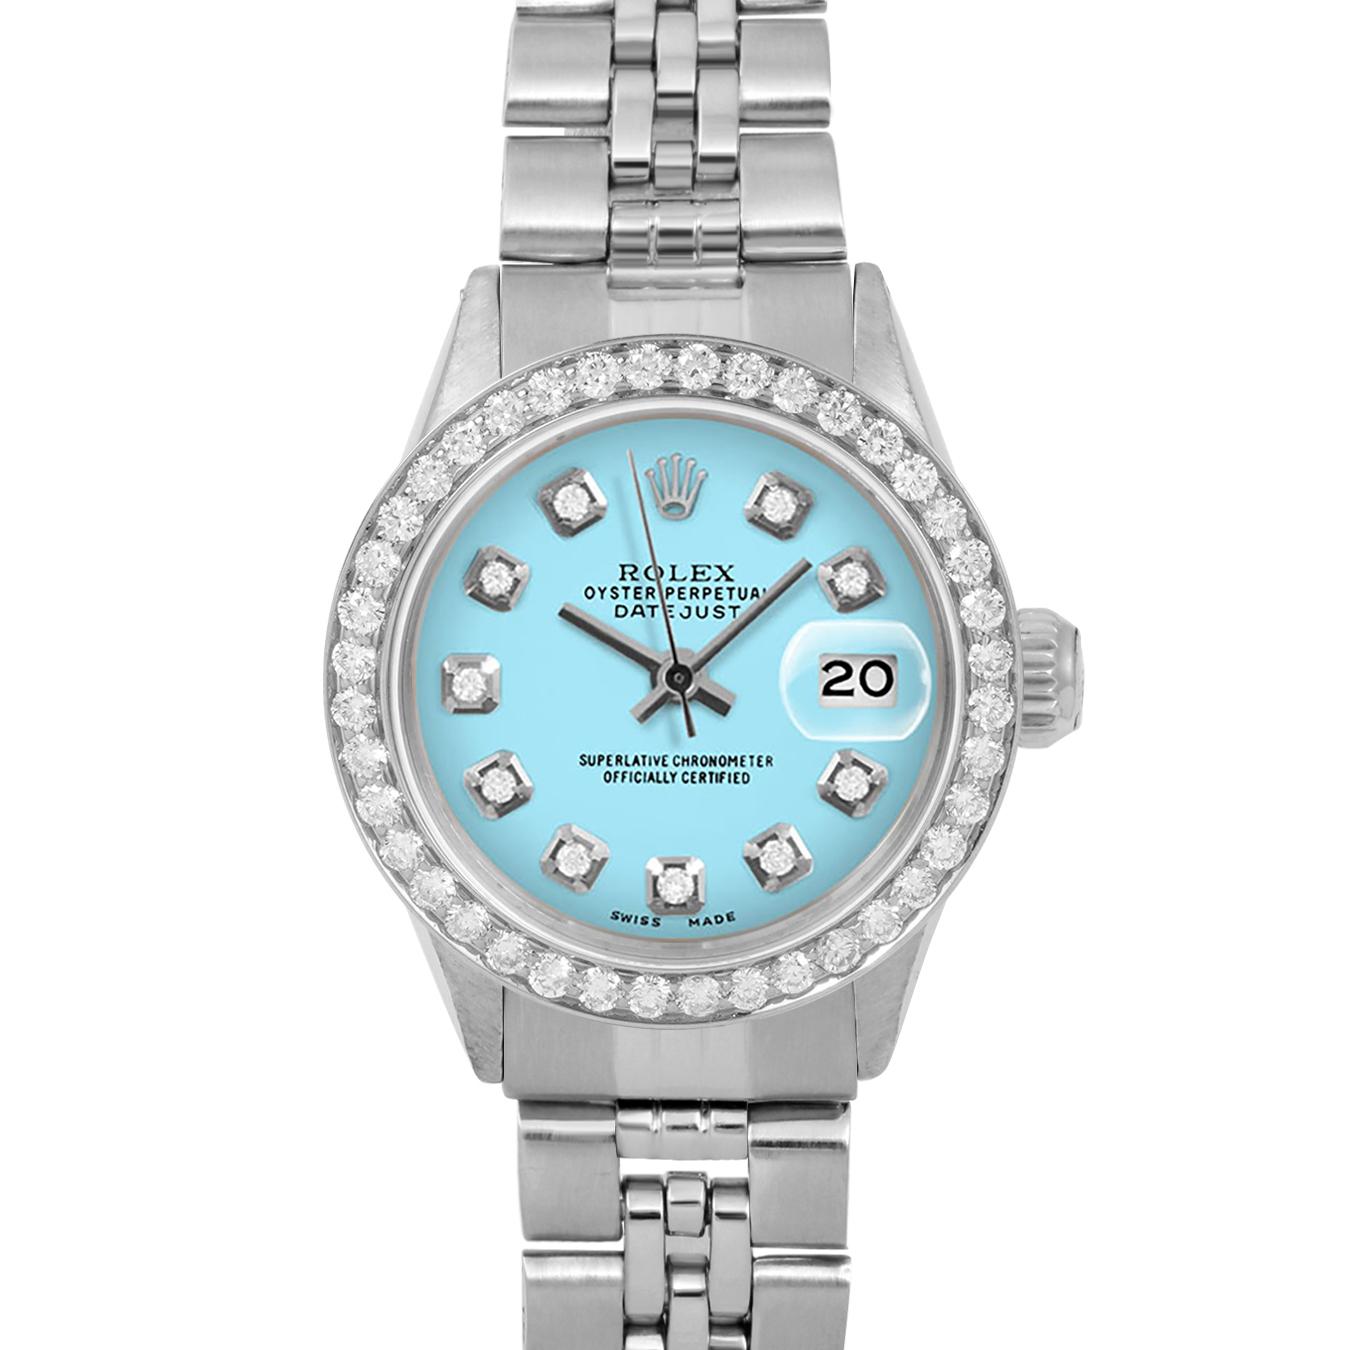 Brand : Rolex
Model : Datejust (Non-Quickset Model)
Gender : Ladies
Metals : Stainless Steel
Case Size : 24 mm
Dial : Custom Turquoise Diamond Dial (This dial is not original Rolex And has been added aftermarket yet is a beautiful Custom